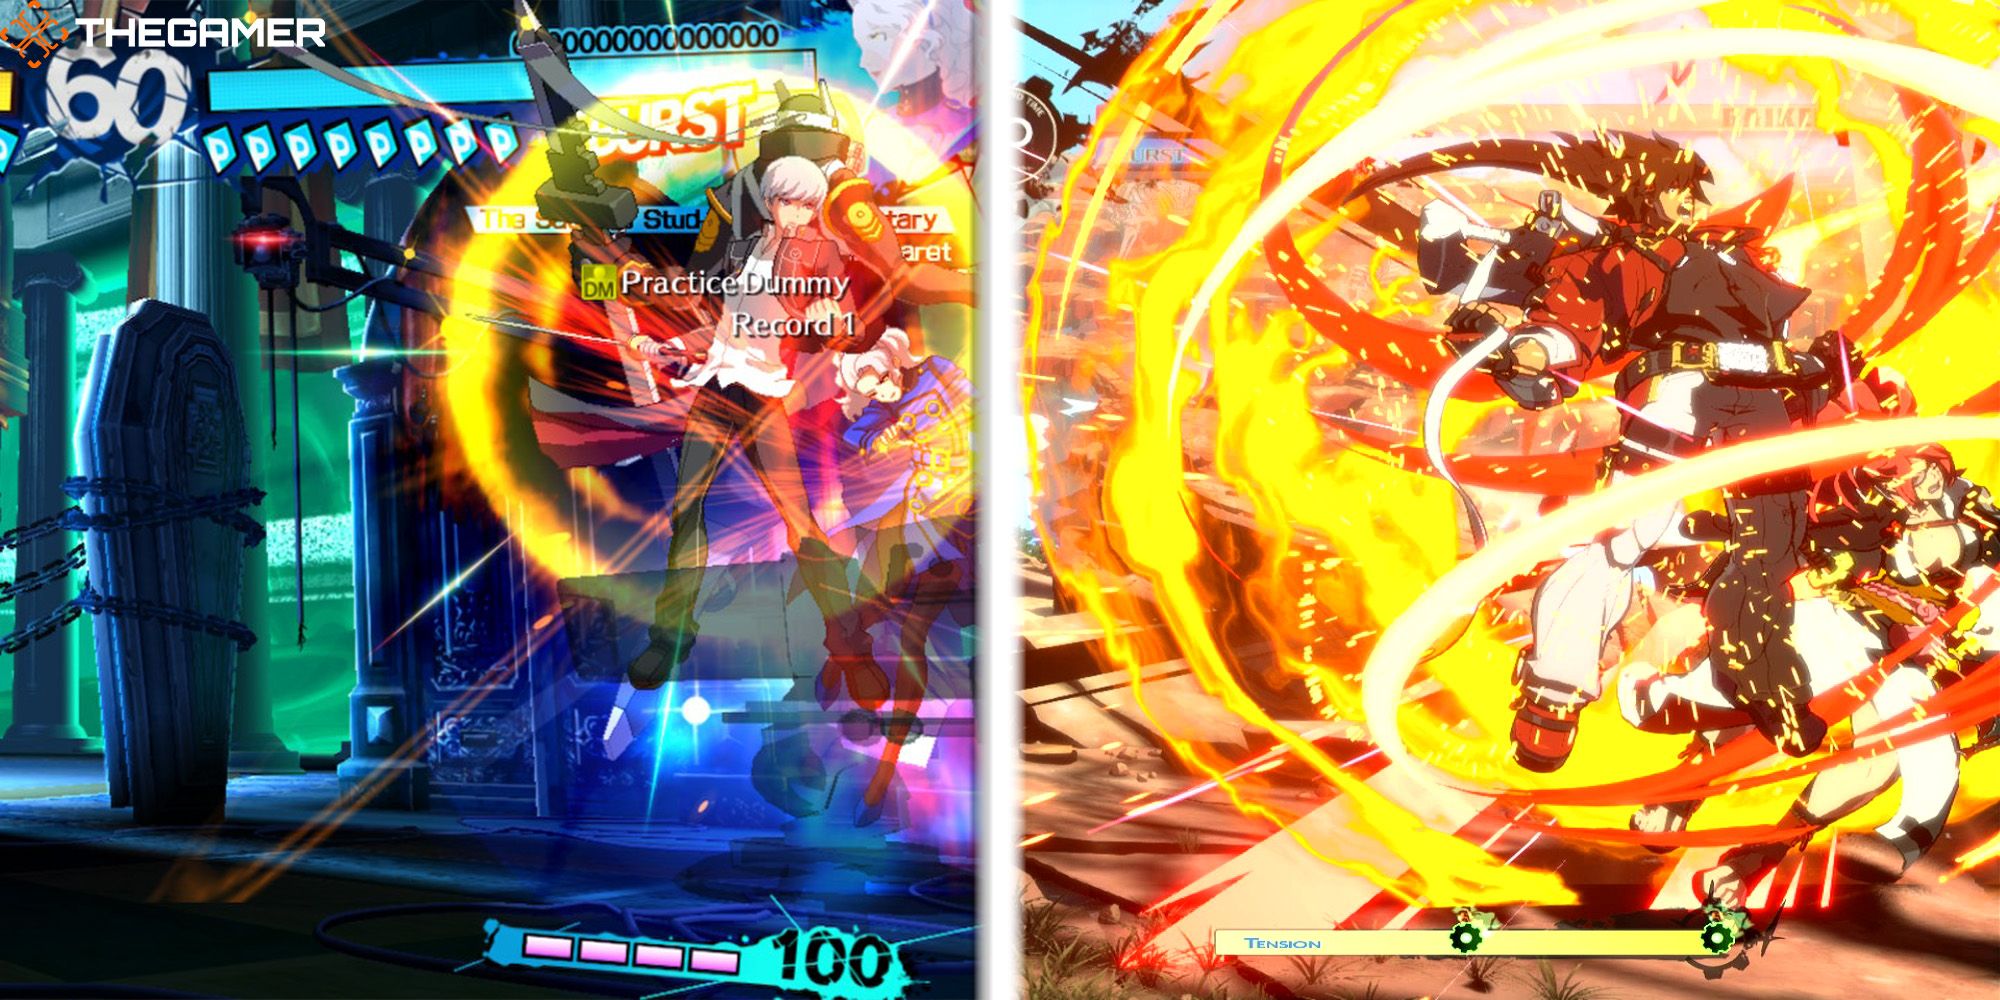 [Left Panel] Yu knocks Margaret back with a Burst. Persona 4 Arena Ultimax. [Right Panel] Sol knocks back Baiken with a Burst. Guilty Gear Strive.